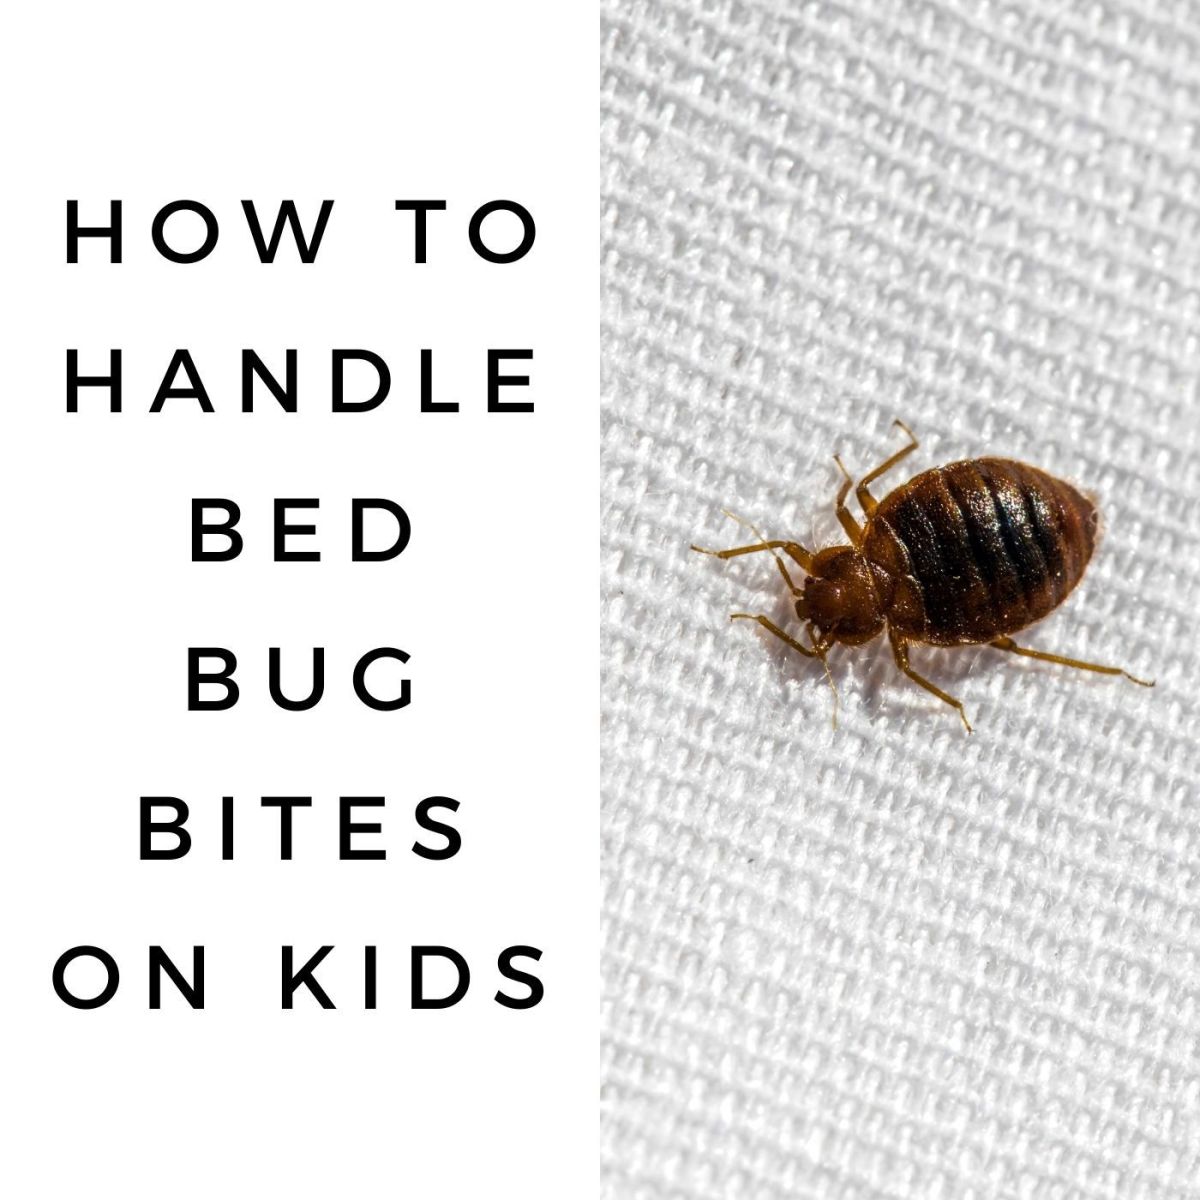 Do you know the signs and symptoms of bed bugs?